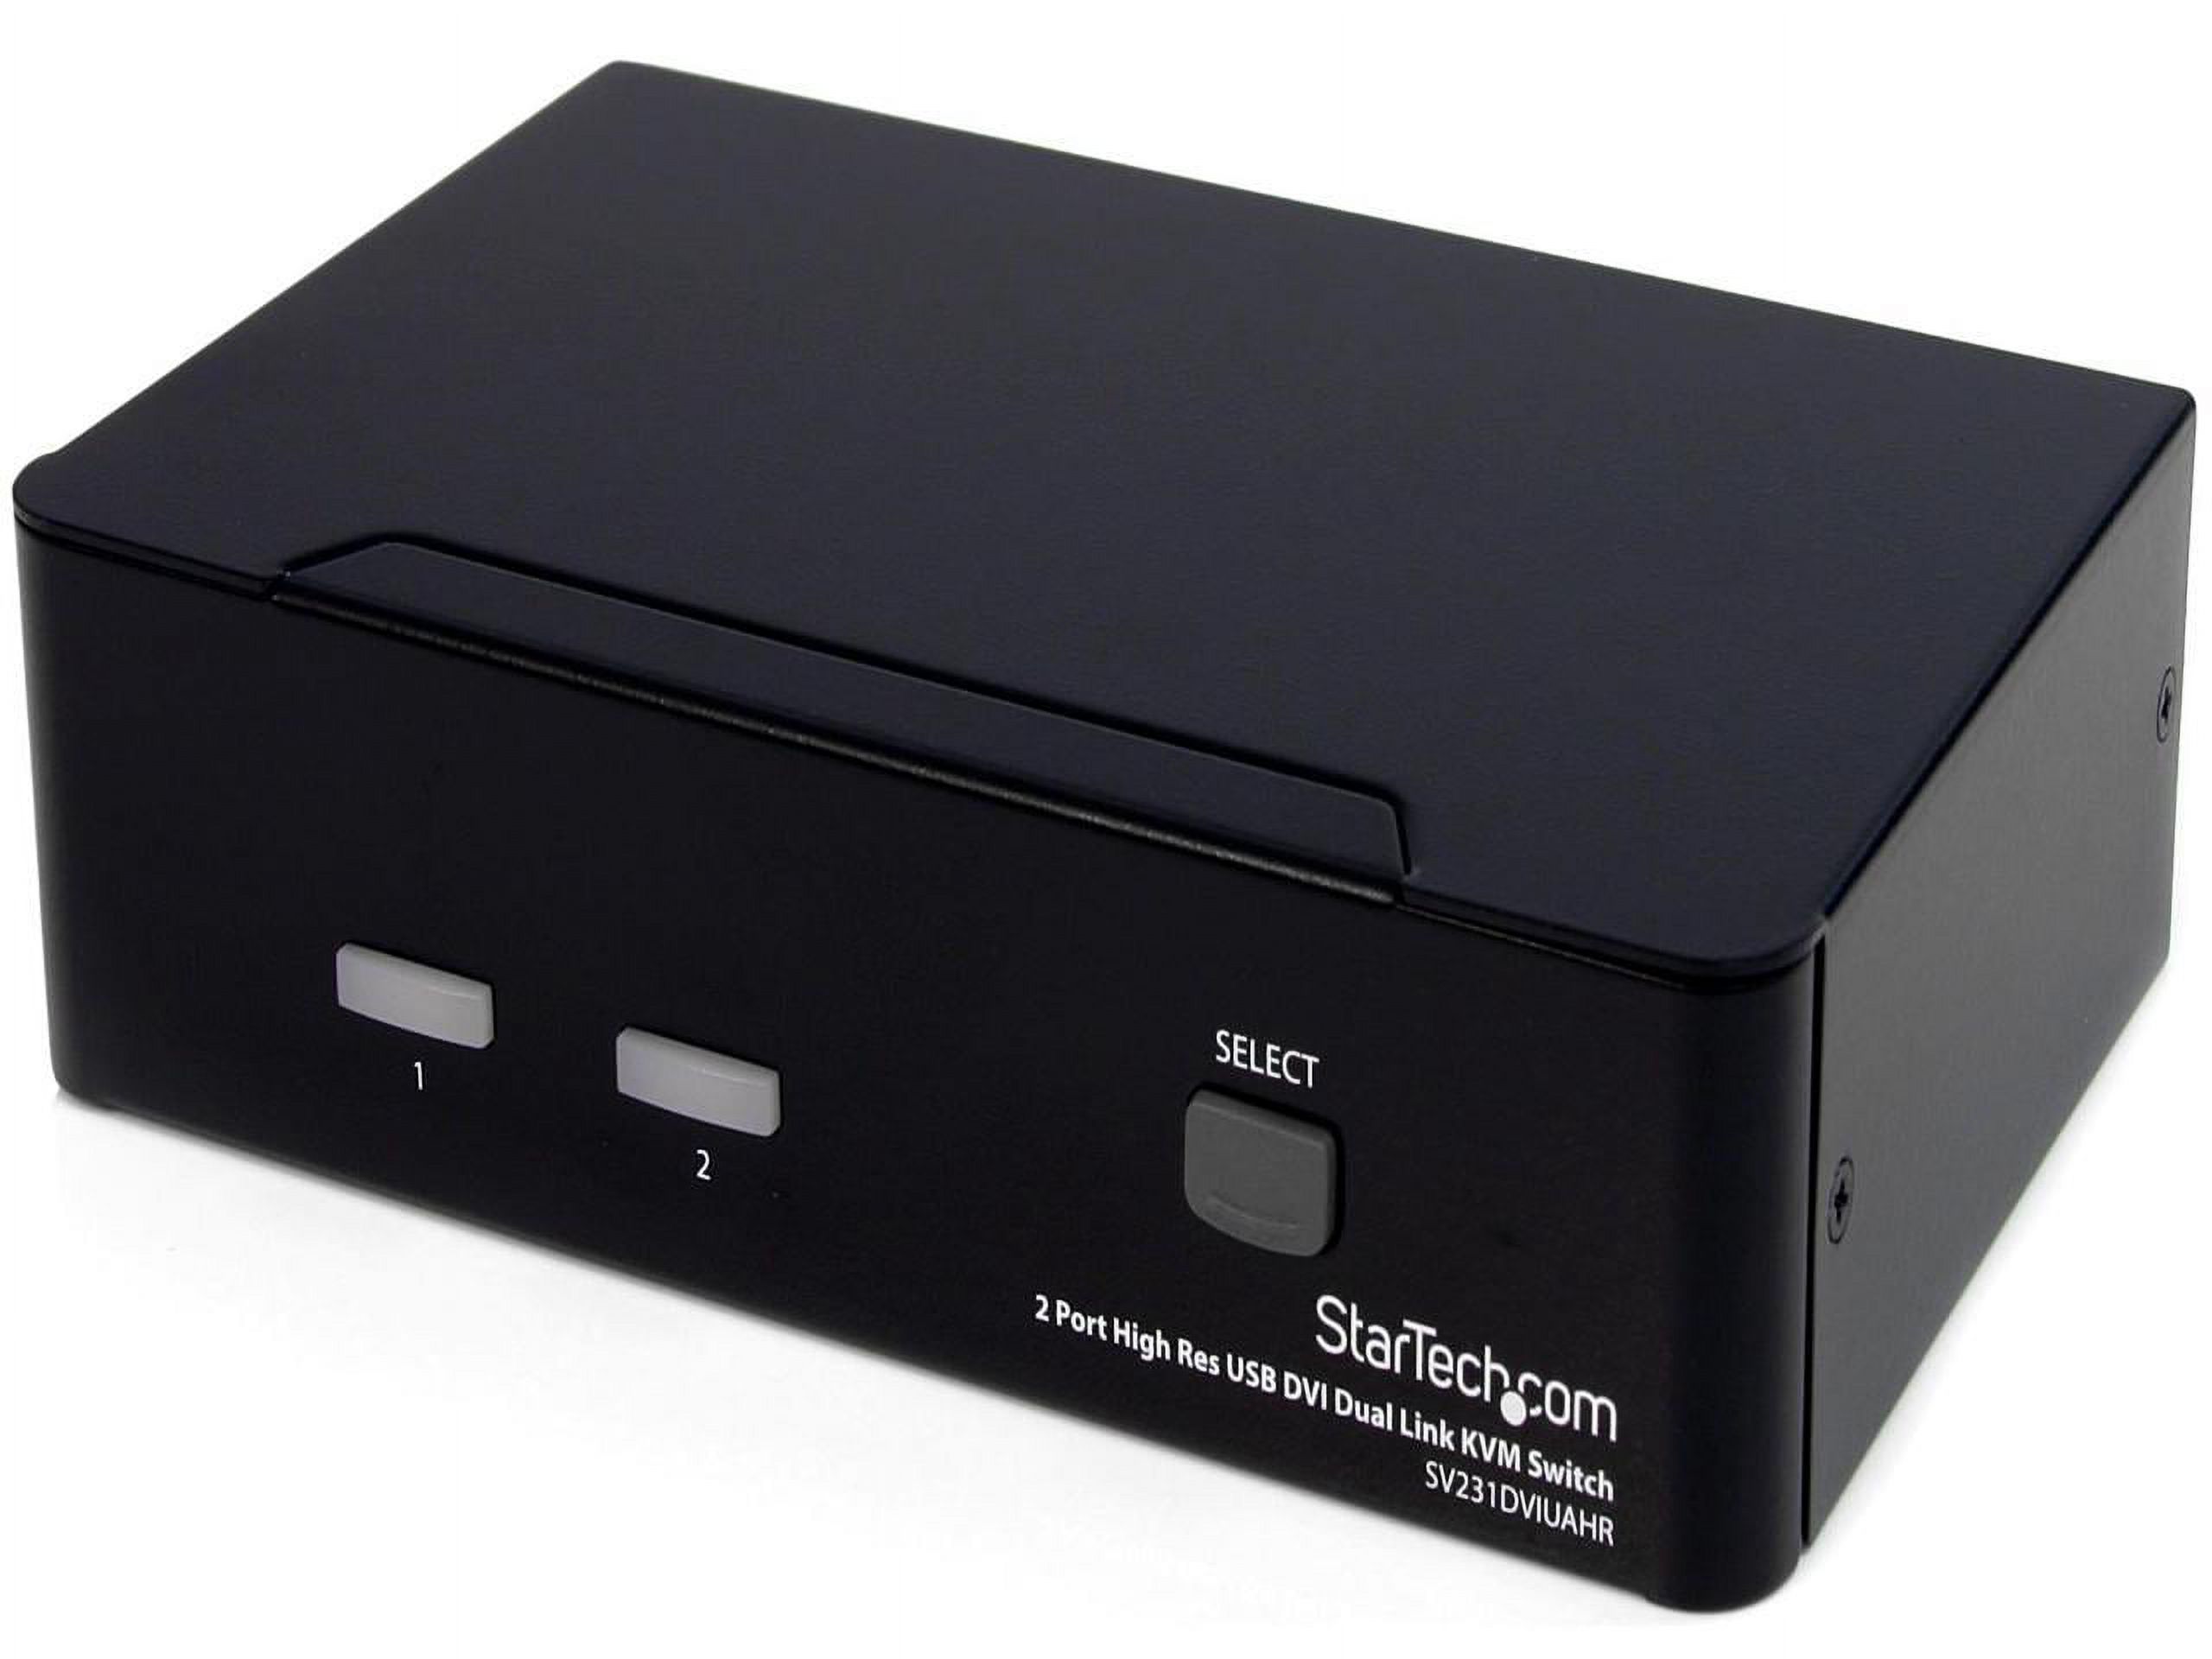 StarTech 2-Port High Resolution USB DVI Dual Link KVM Switch with Audio - image 1 of 3